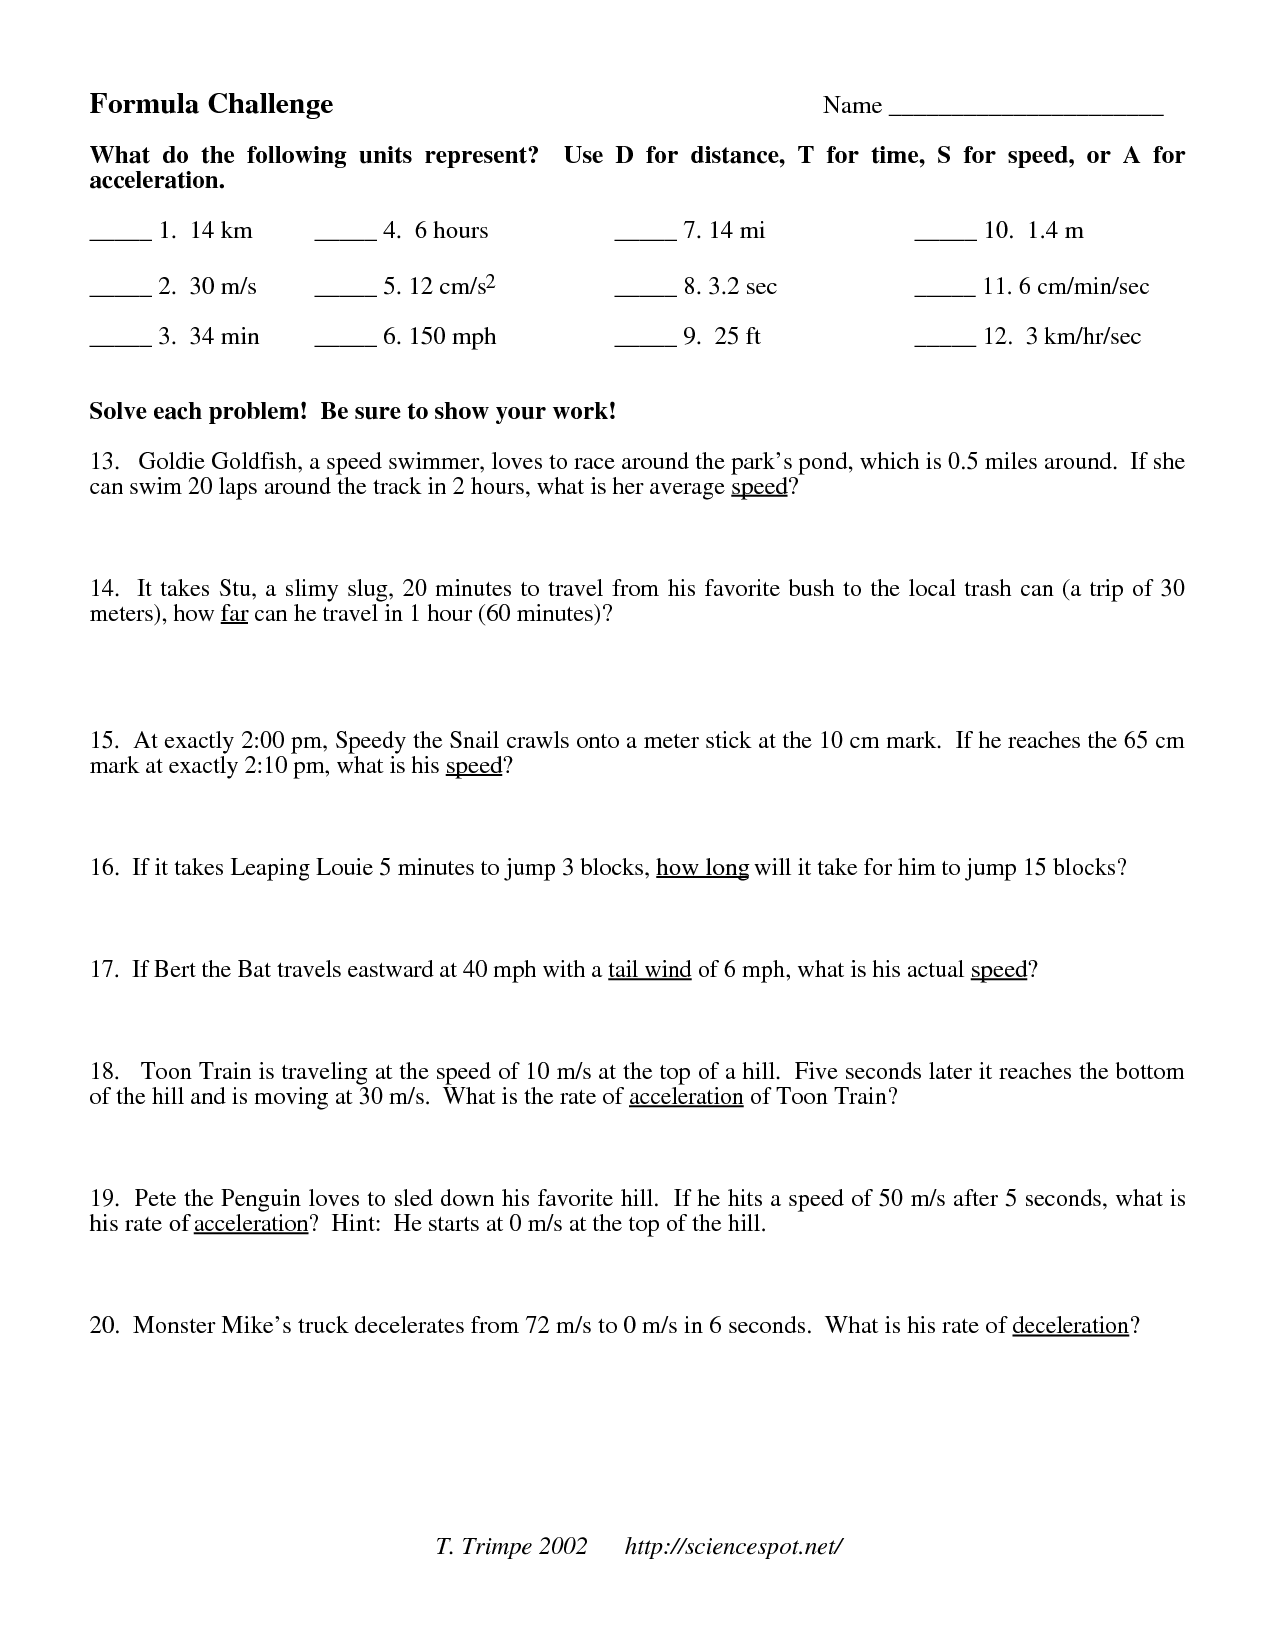 Speed and Acceleration Worksheet Answers Image